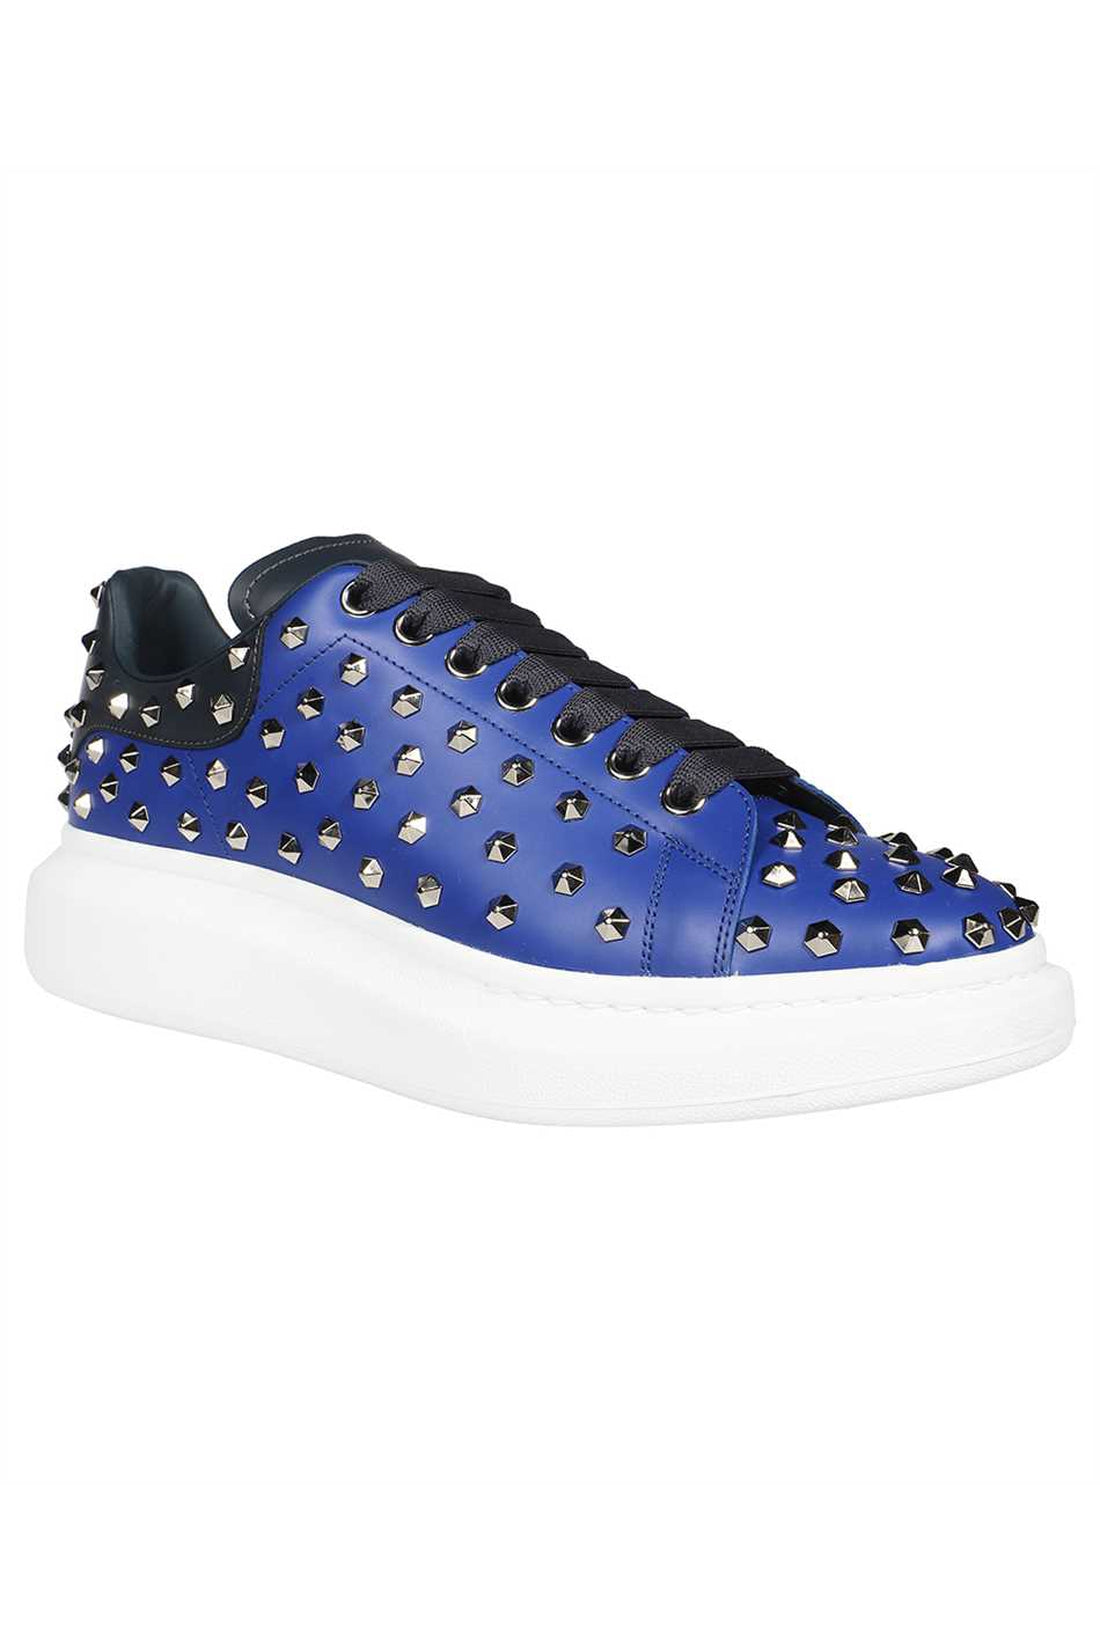 Alexander McQueen-OUTLET-SALE-Larry leather sneakers-ARCHIVIST